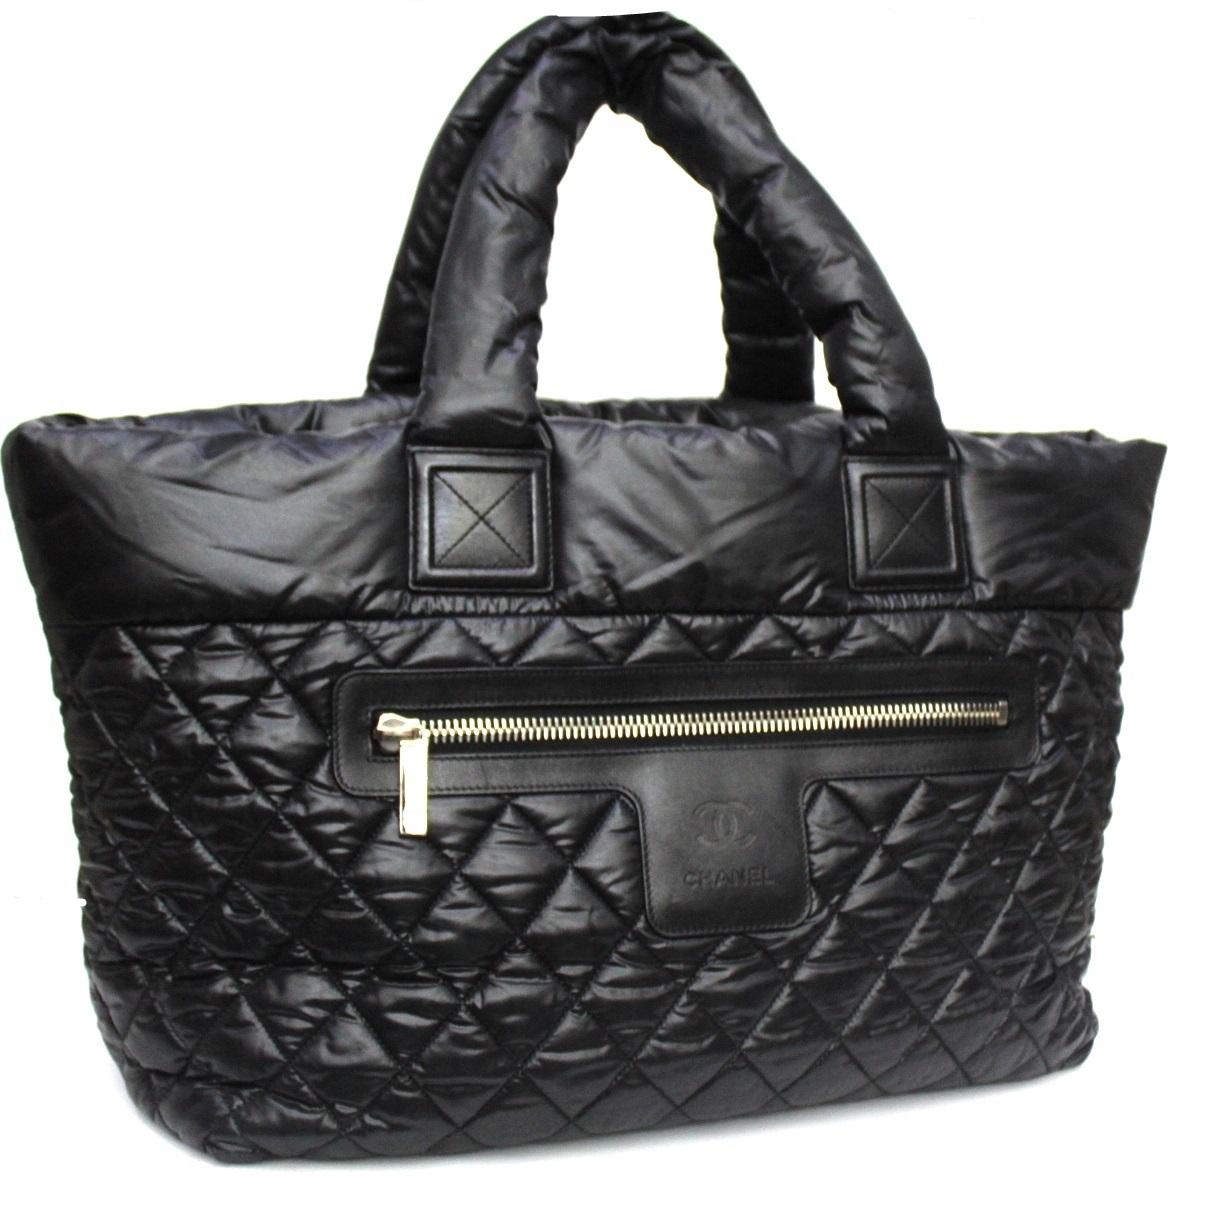 Chanel Coco Cocoom bag made of black padded nylon with black leather trim with silver hardware.
Double handle to wear it comfortably on the shoulder. Zip closure, very roomy inside.
The bag is in excellent condition. 